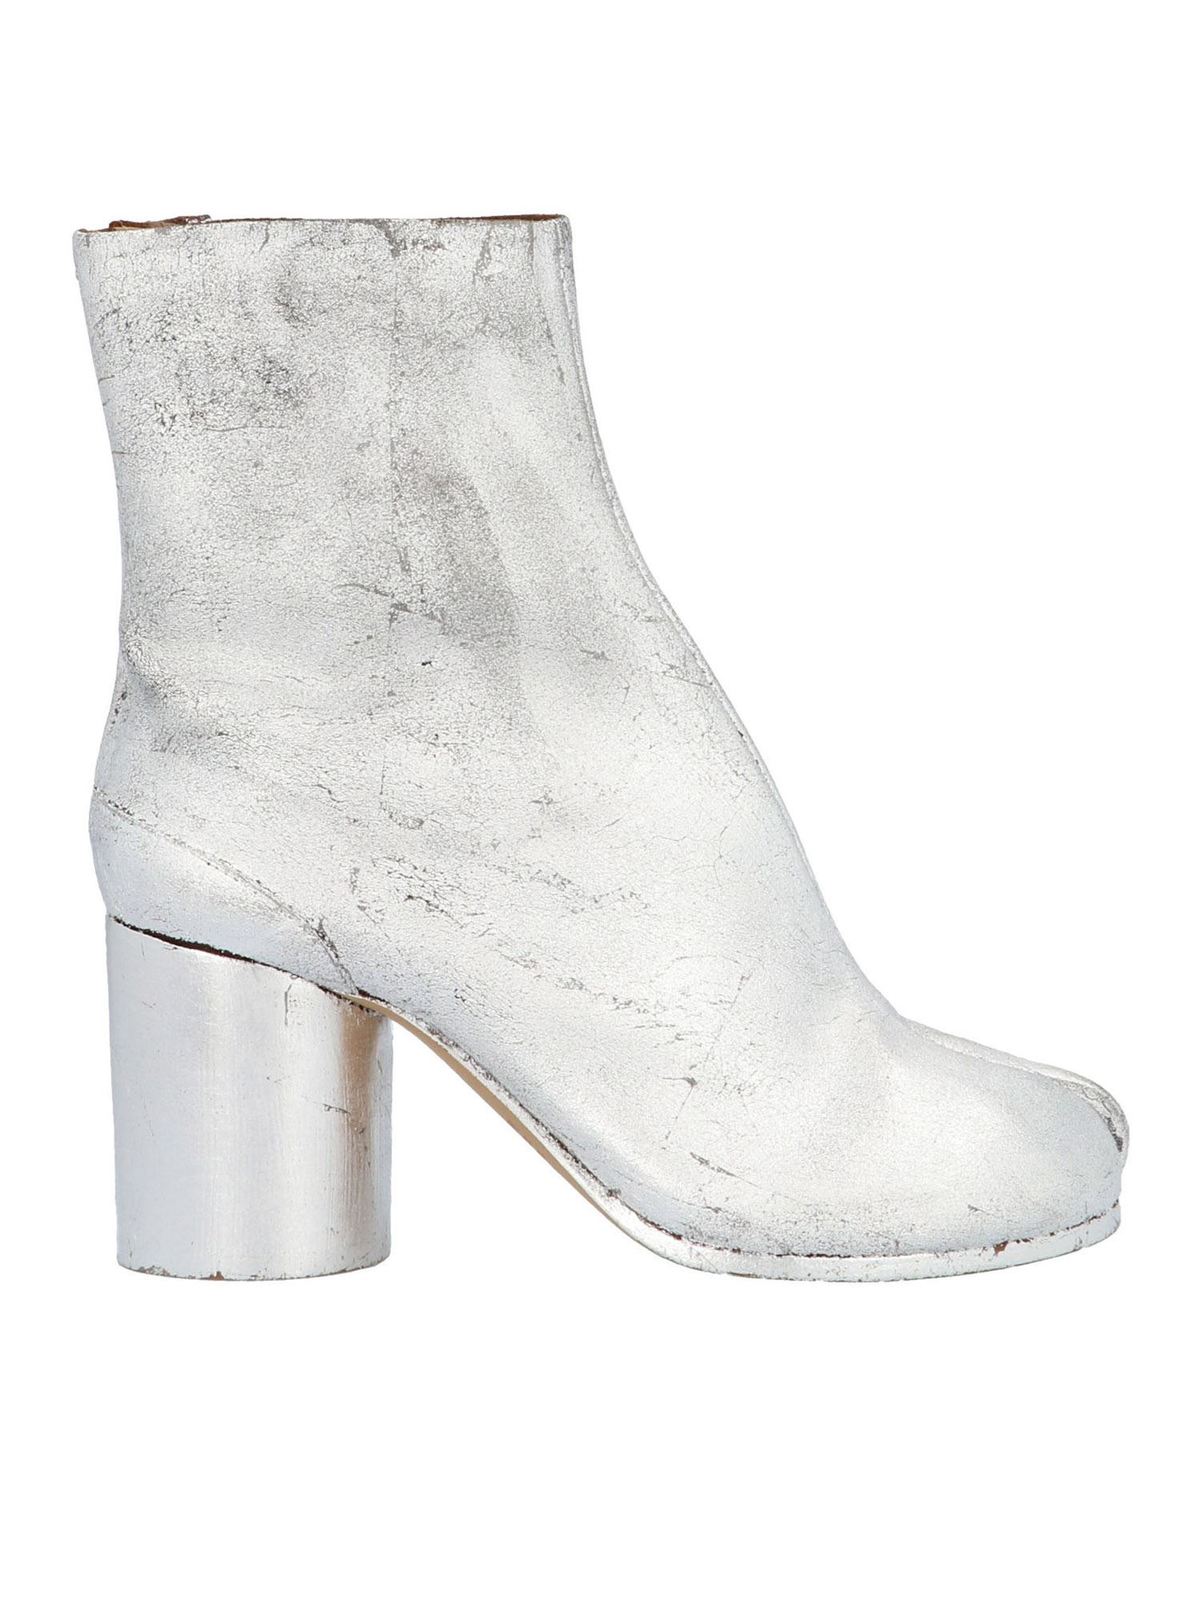 Maison Margiela - Silver Tabi ankle boots - ankle boots